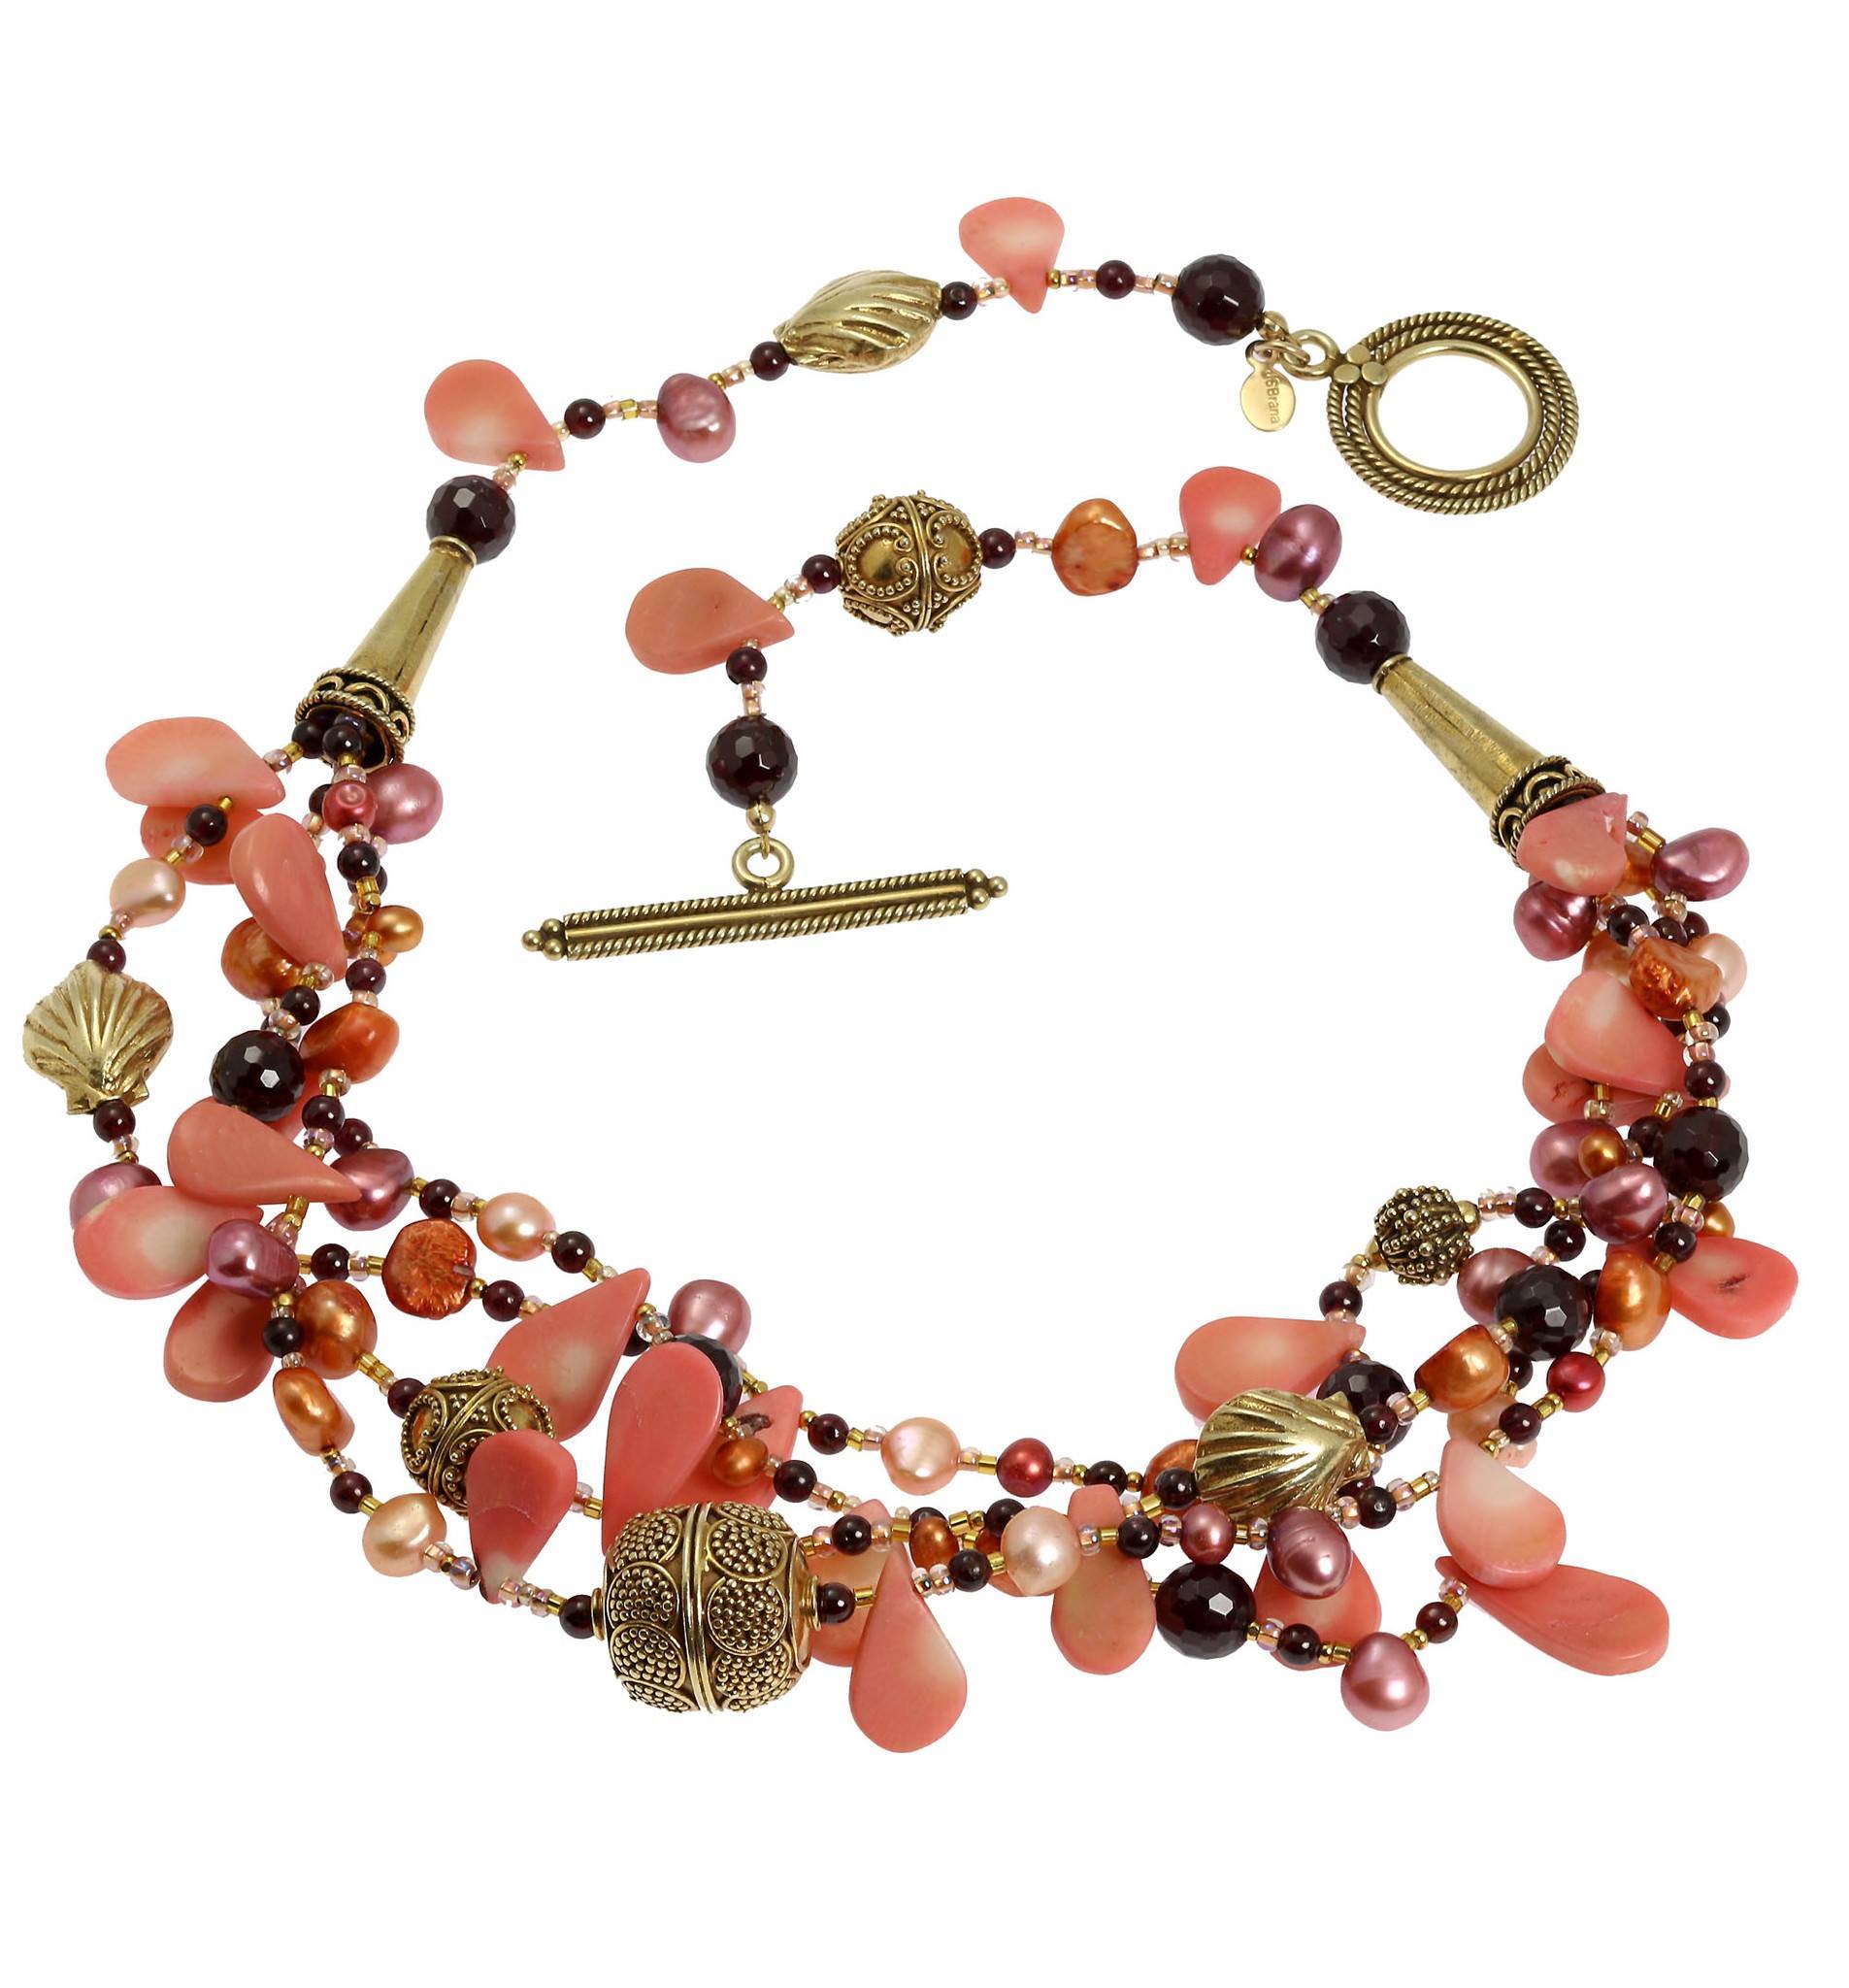 Detail View of Pink Coral Garnet Beaded Gemstone Necklace 